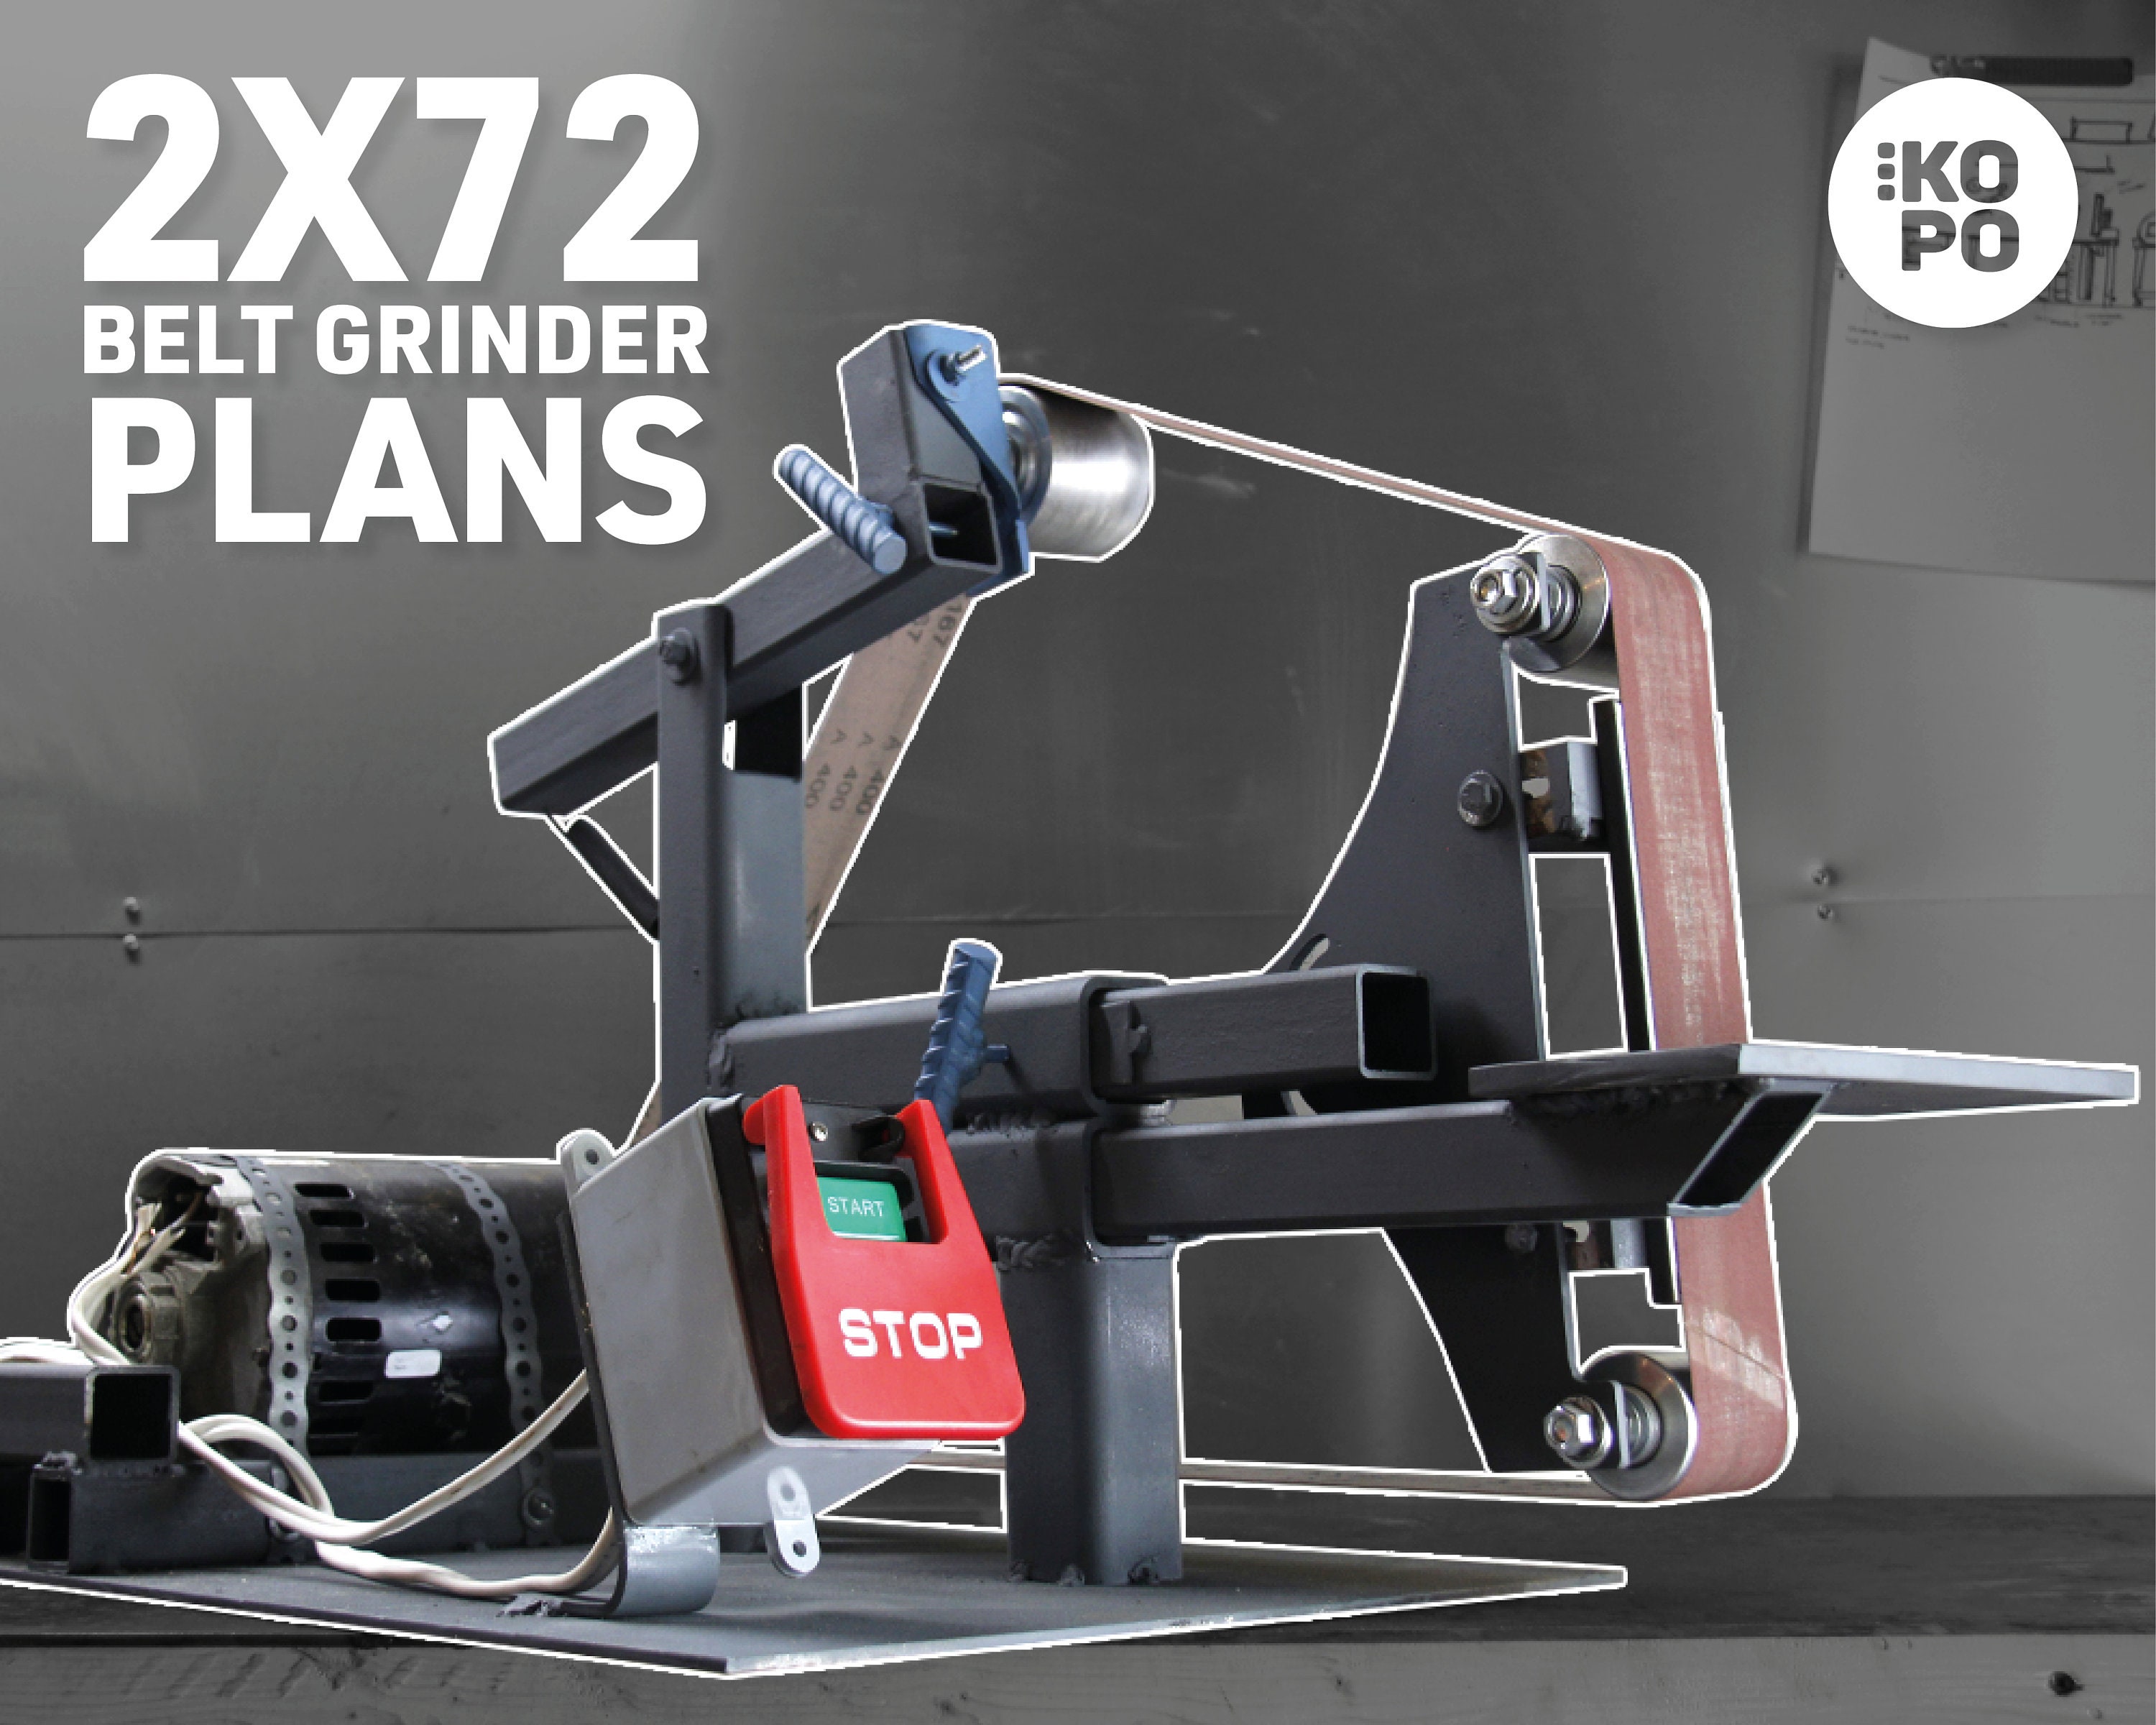 2x72'' Belt Grinder Plans DXF Files Included KOPO Projects 